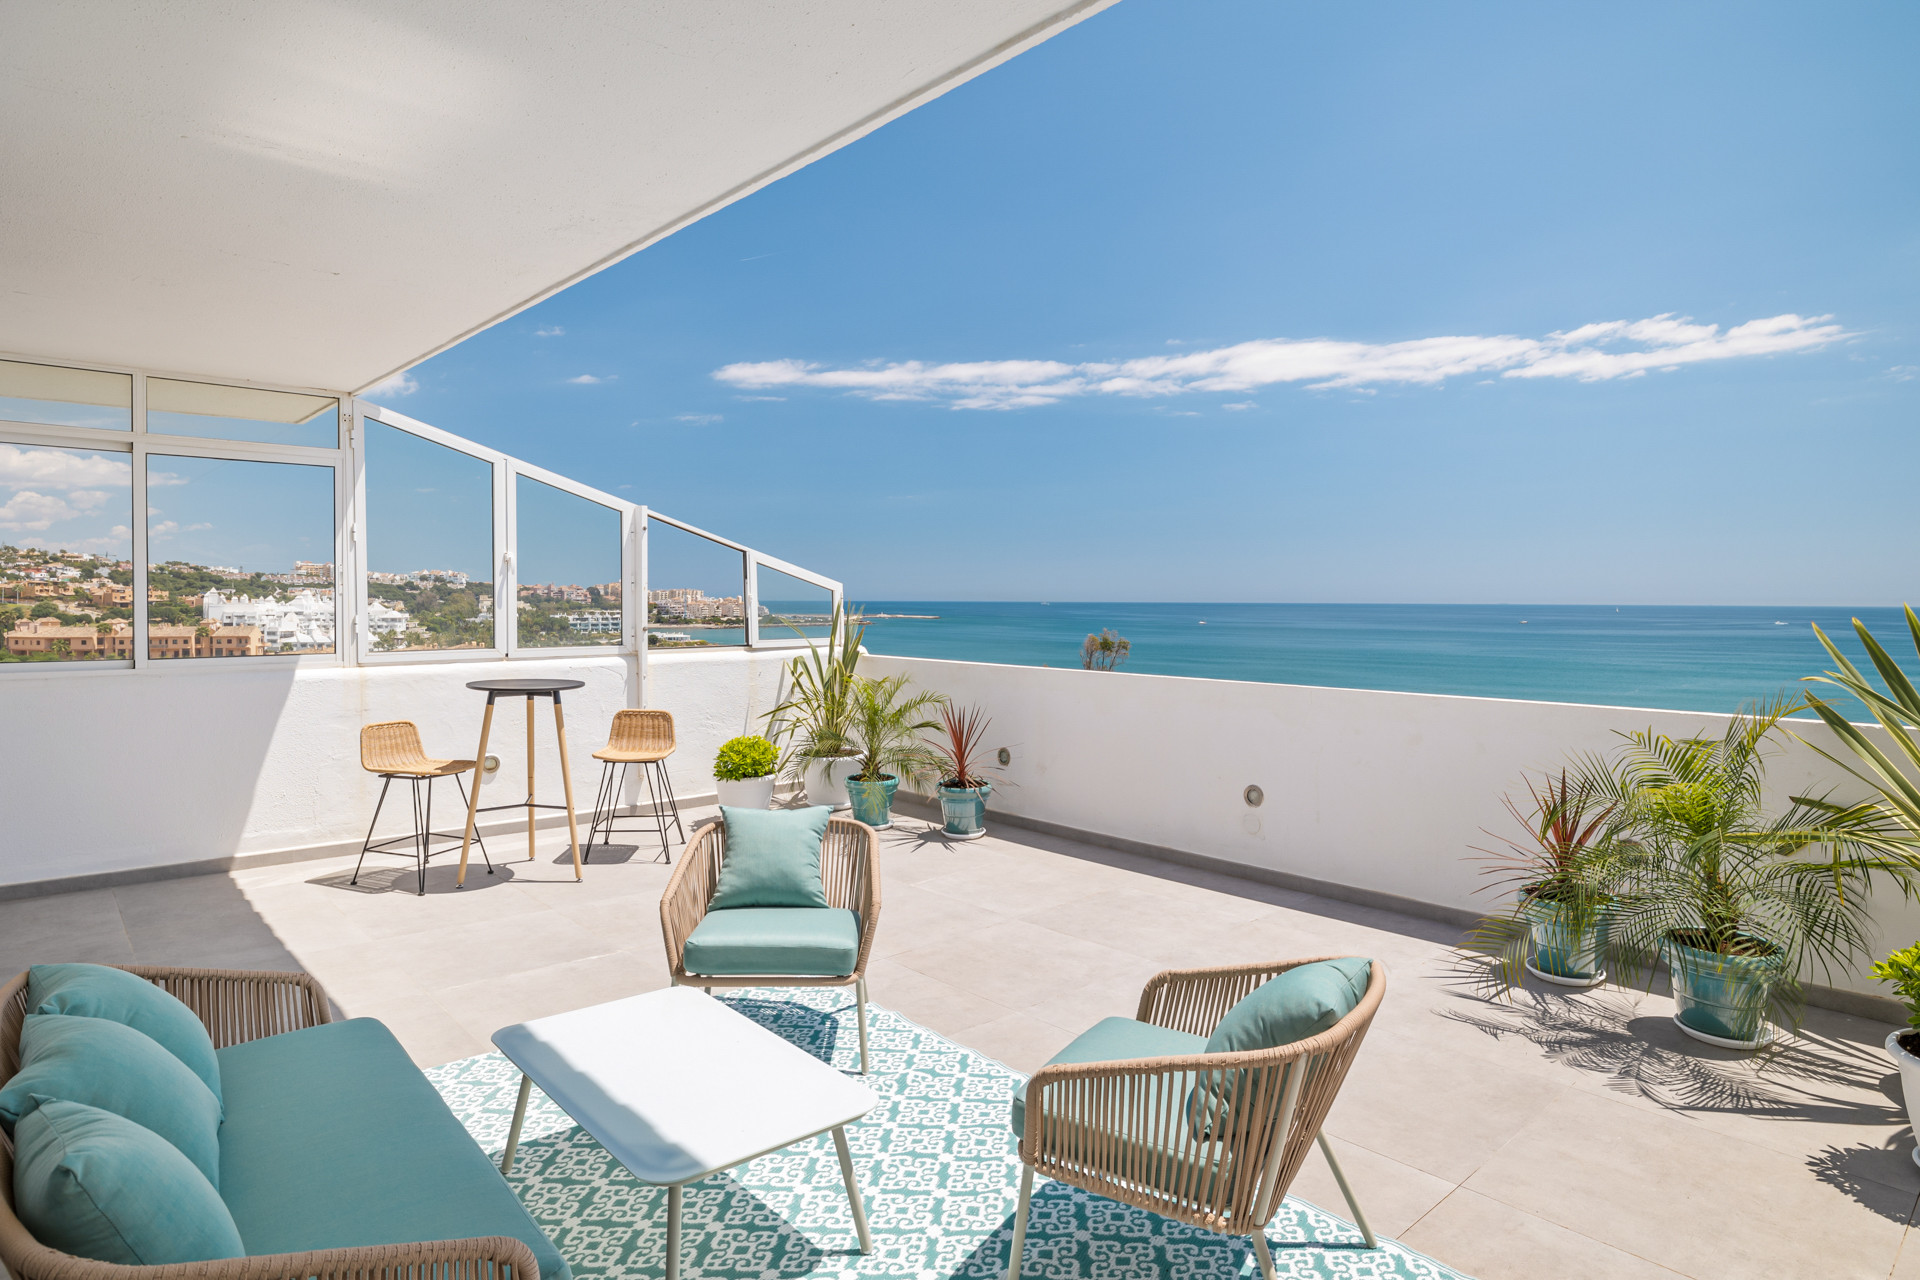 Fully renovated 3 bedroom duplex penthouse with spectacular panoramic views to the Mediterranean